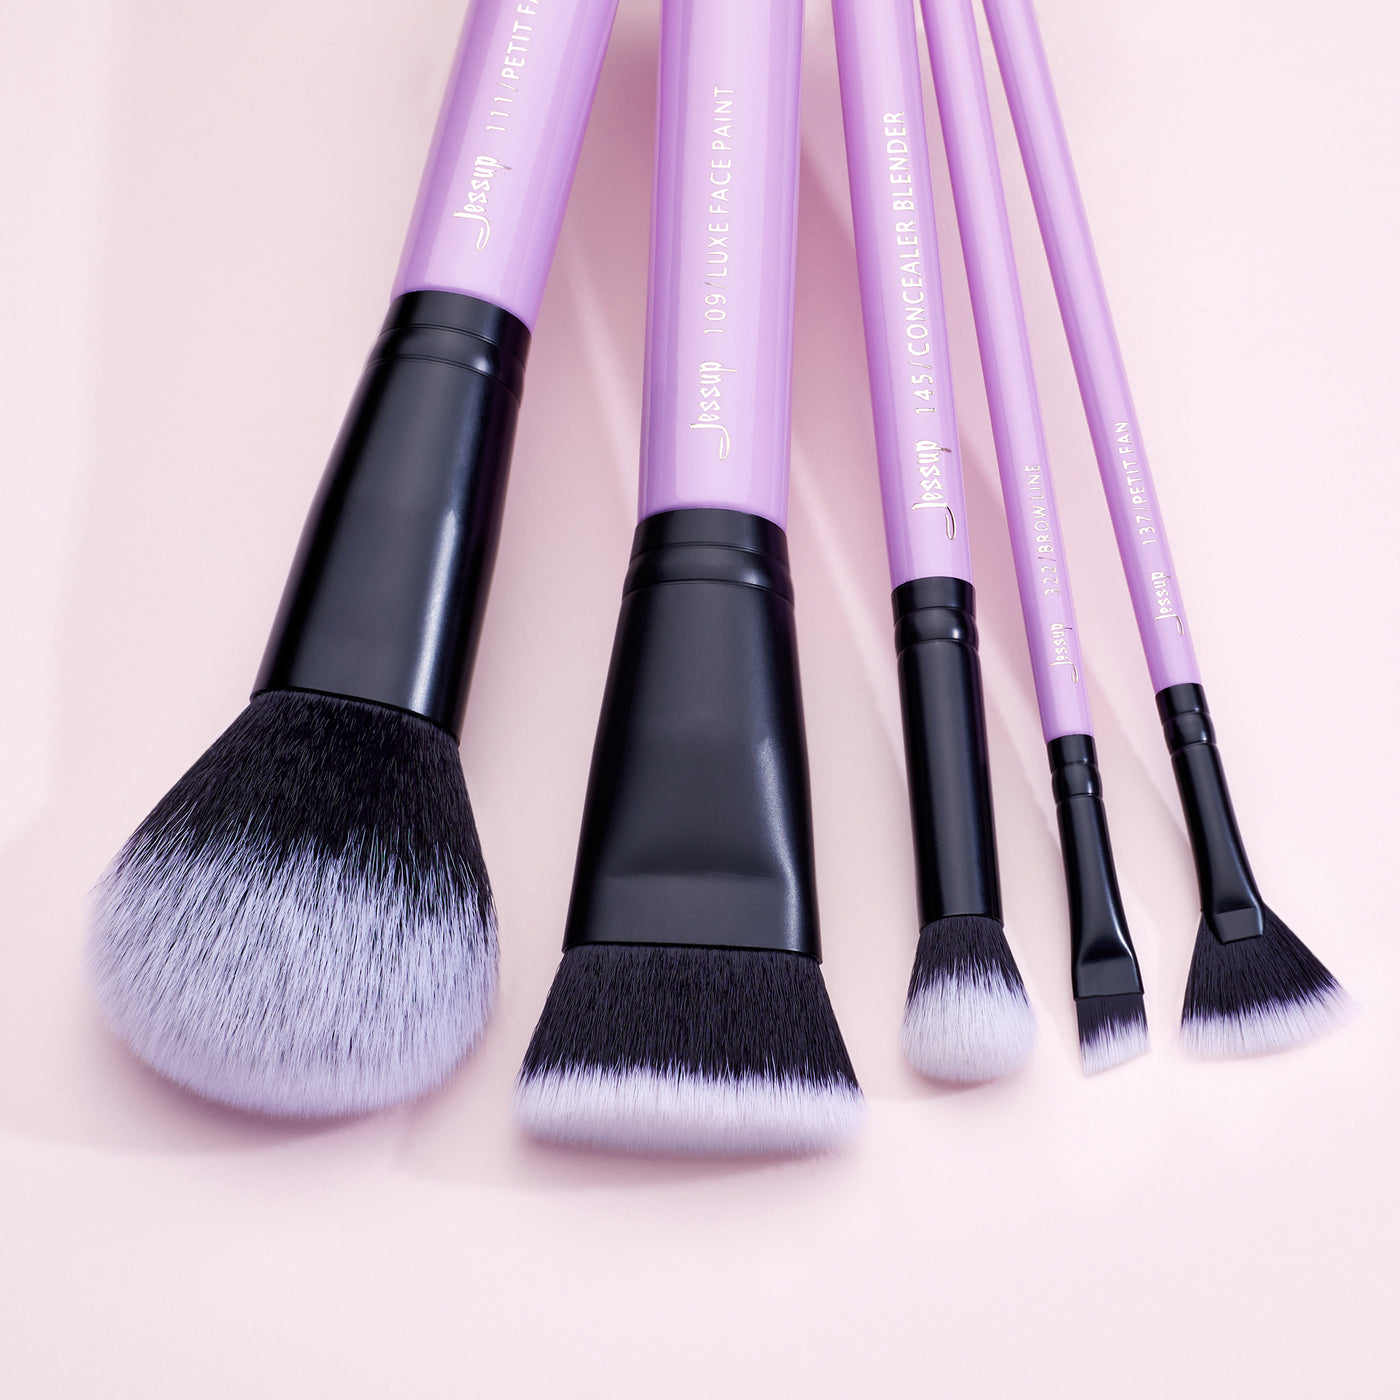 Gifts for girls purple makeup brushes with storage case - Jessup Beauty